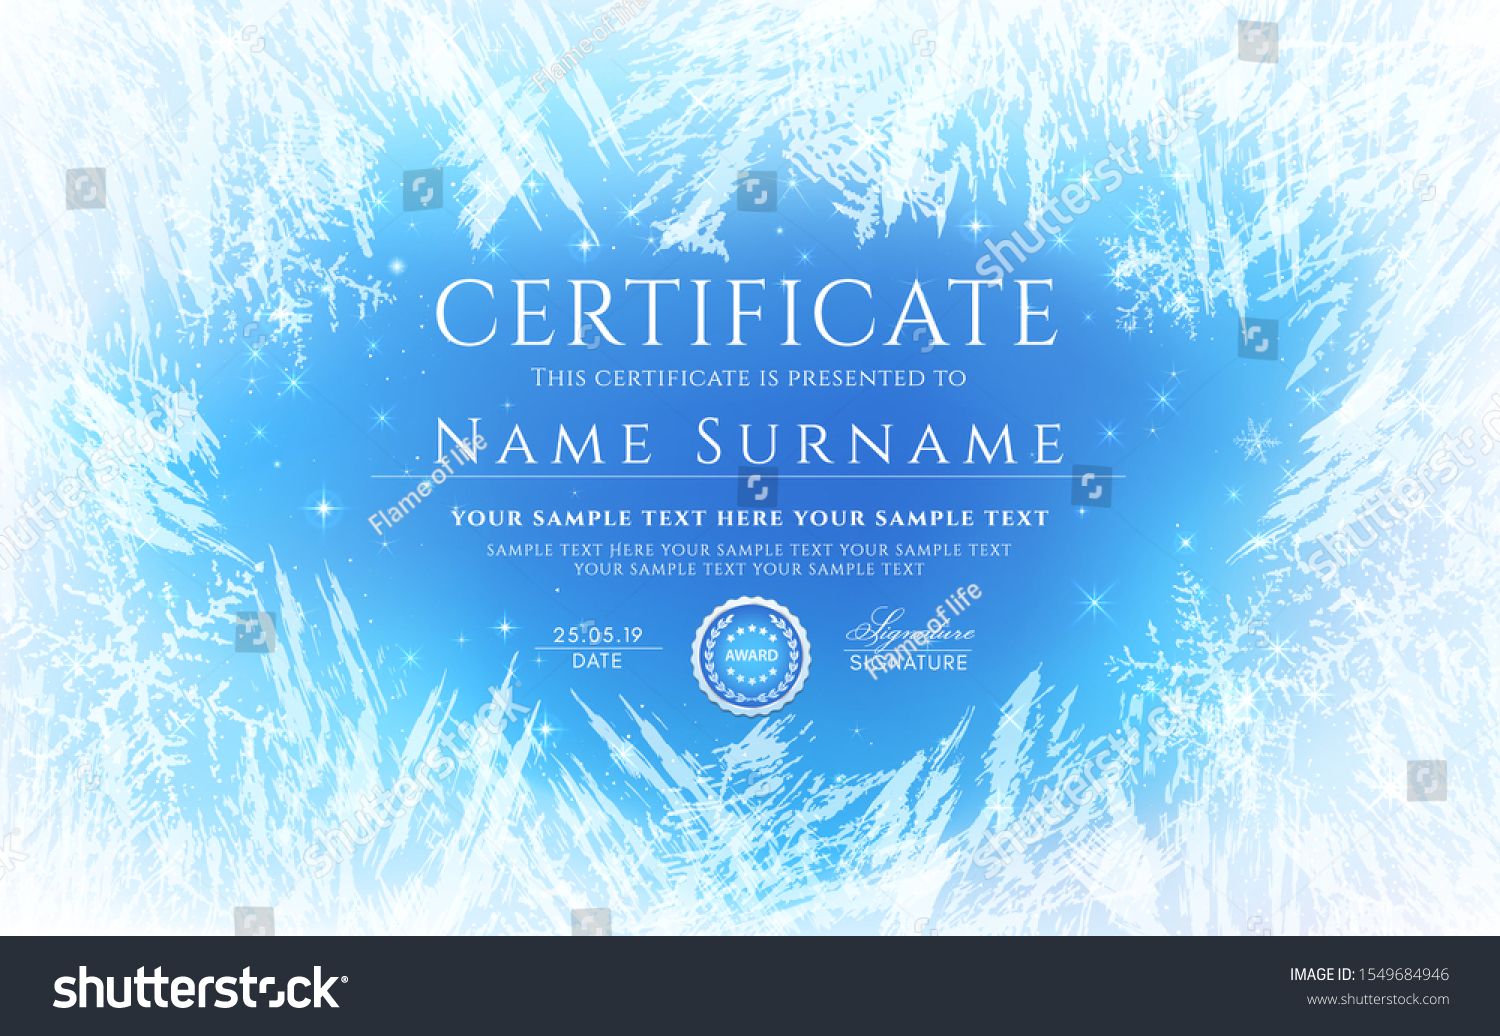 Certificate Template Winter Frost Pattern Background Stock Vector Royalty Free